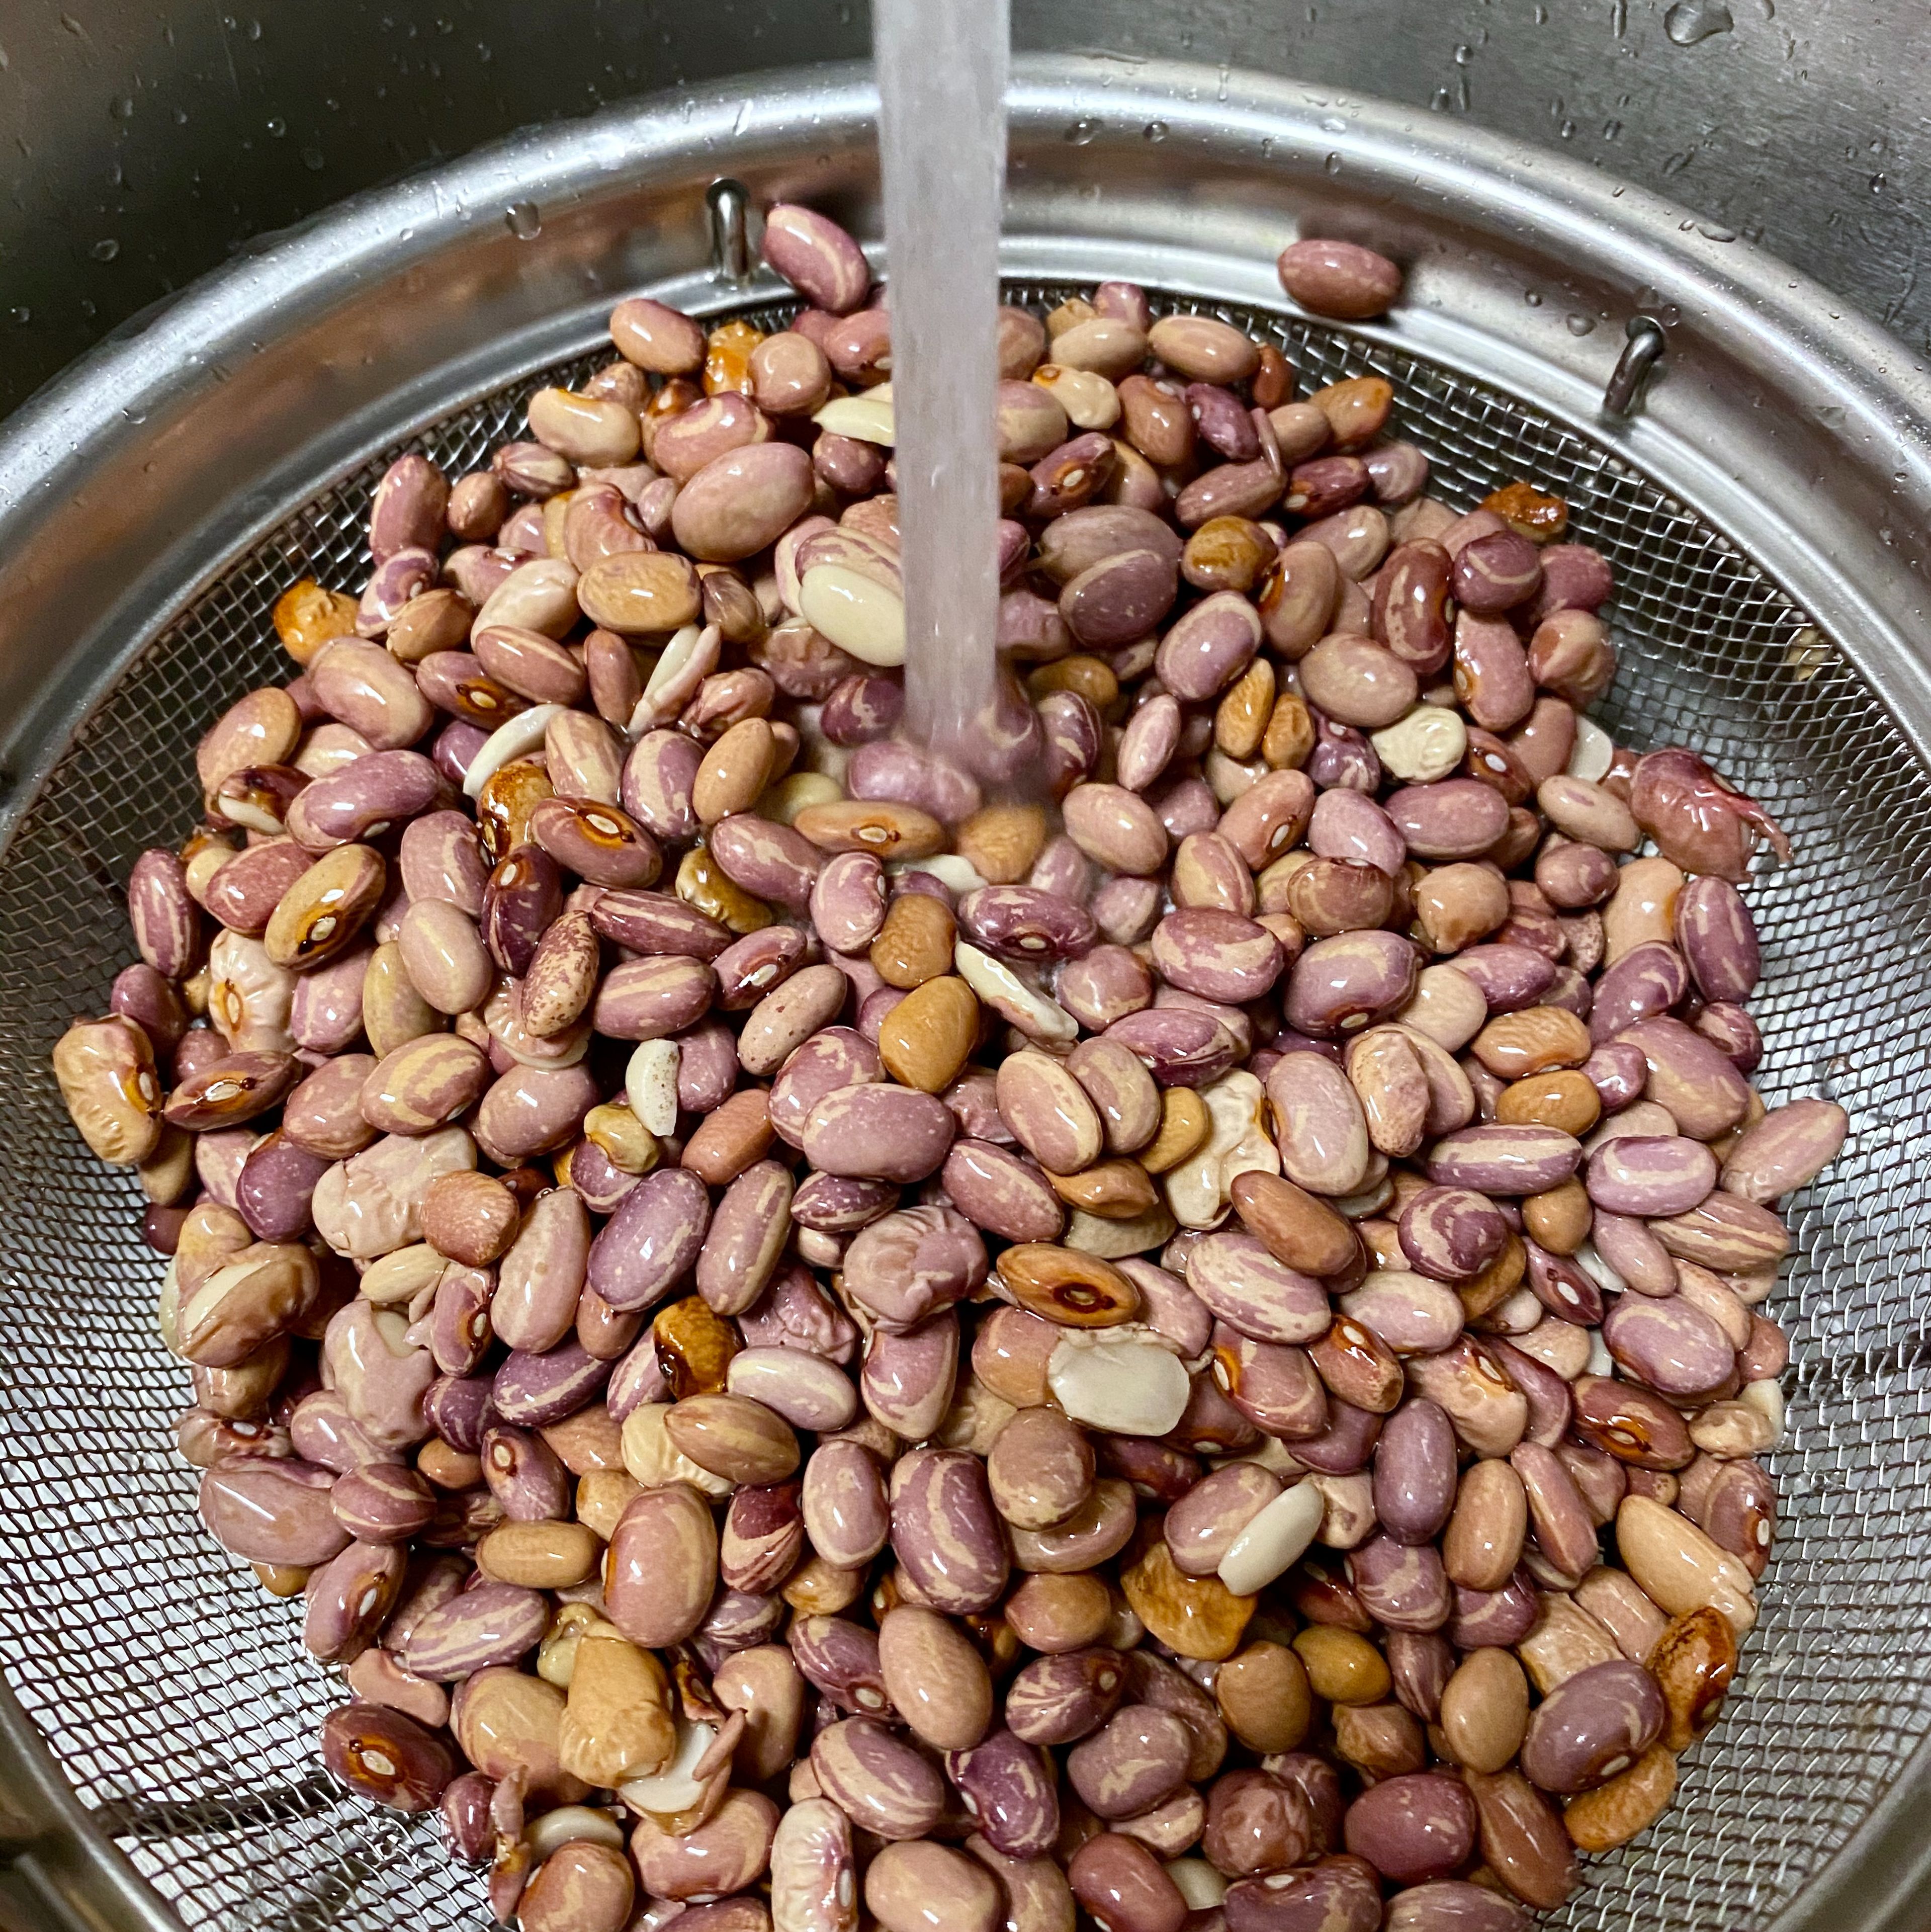 Wash your beans. Just run them under the water and gently wash/massage them to remove any dirt.